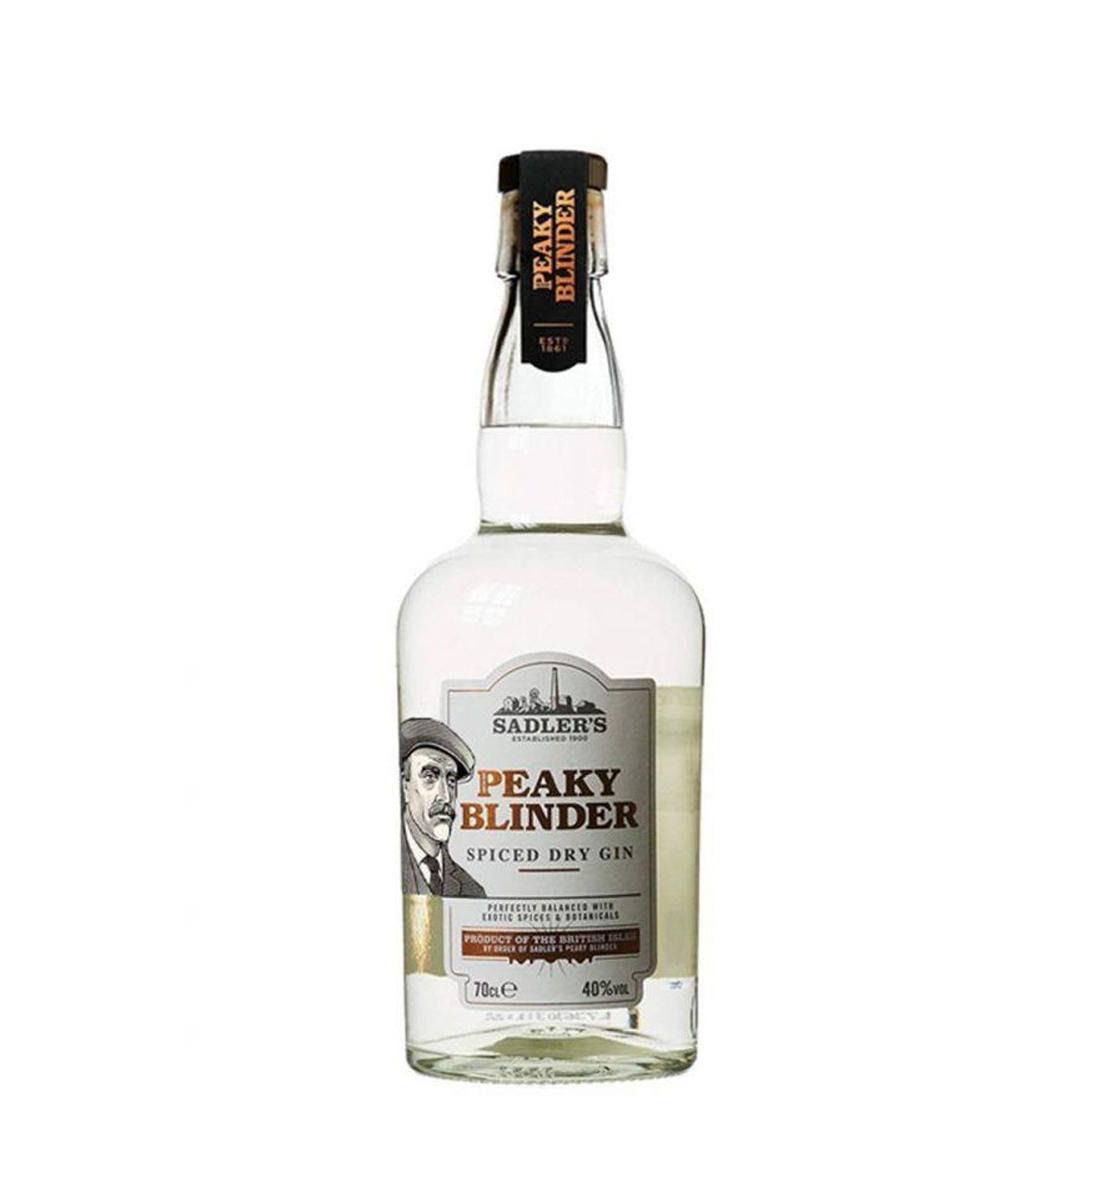 Peaky Blinder Spiced Dry Gin 0.7L 0.7L